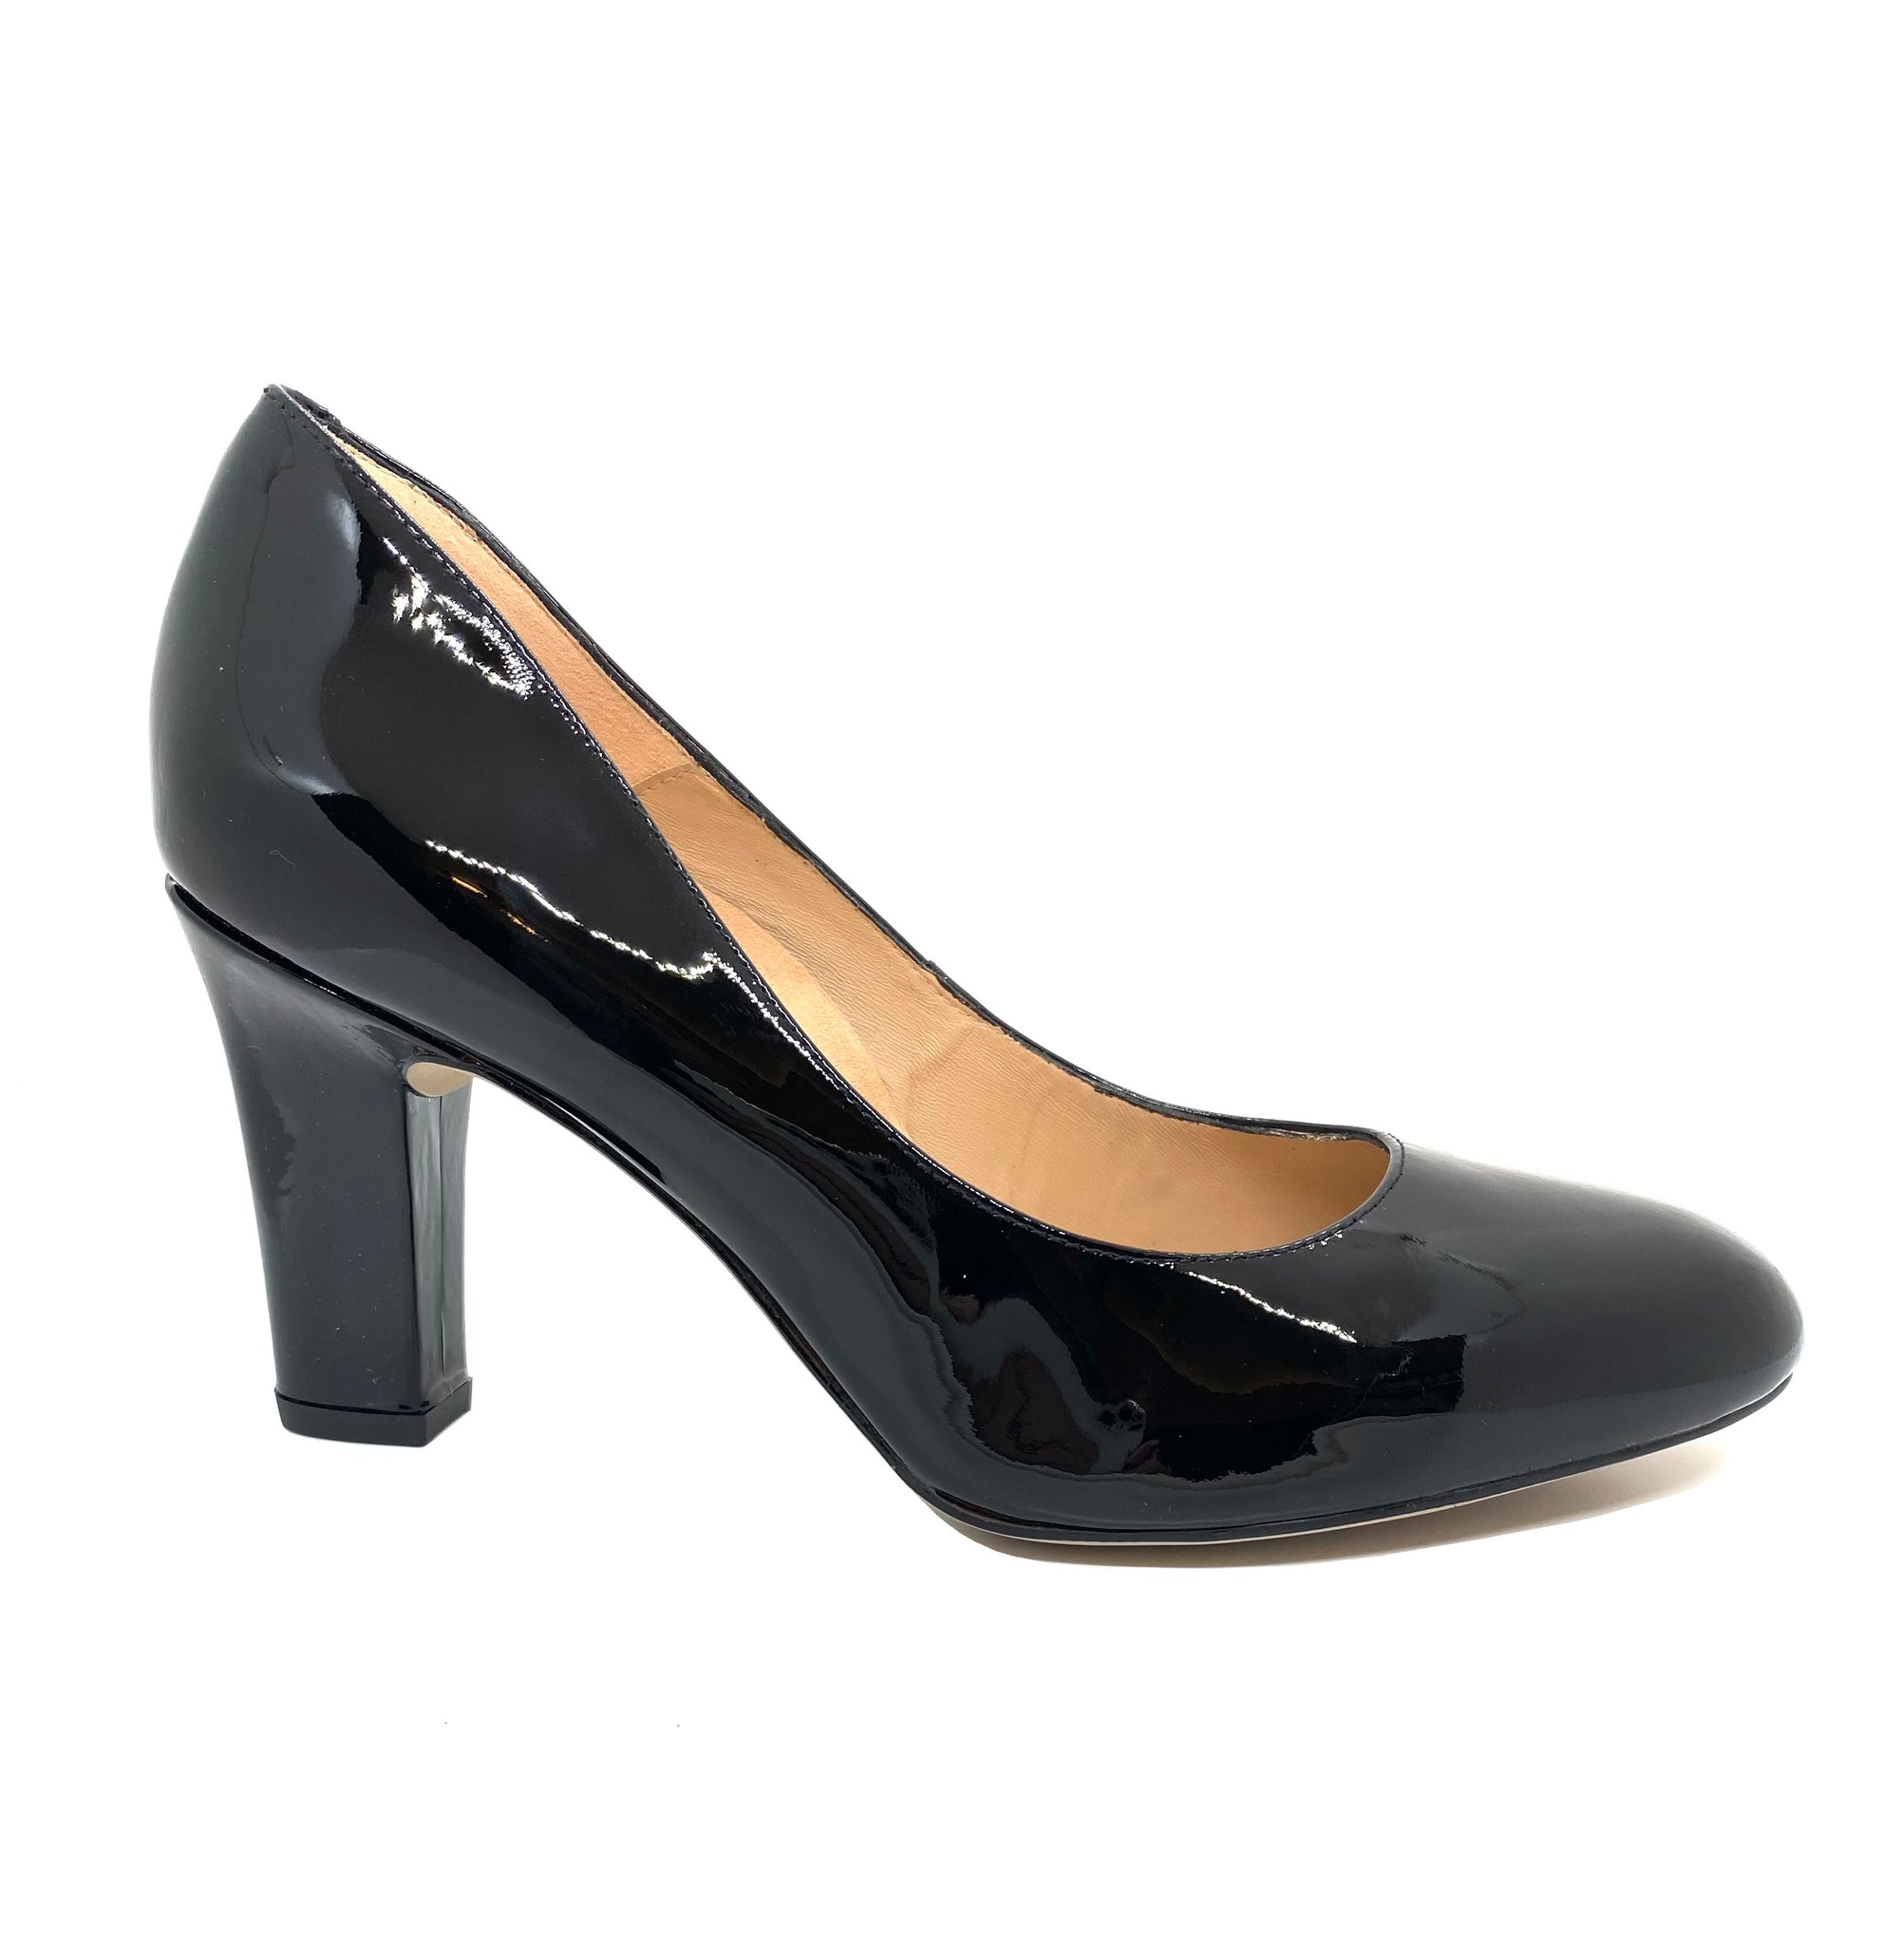 Umis High Heel Patent Leather Court Shoe